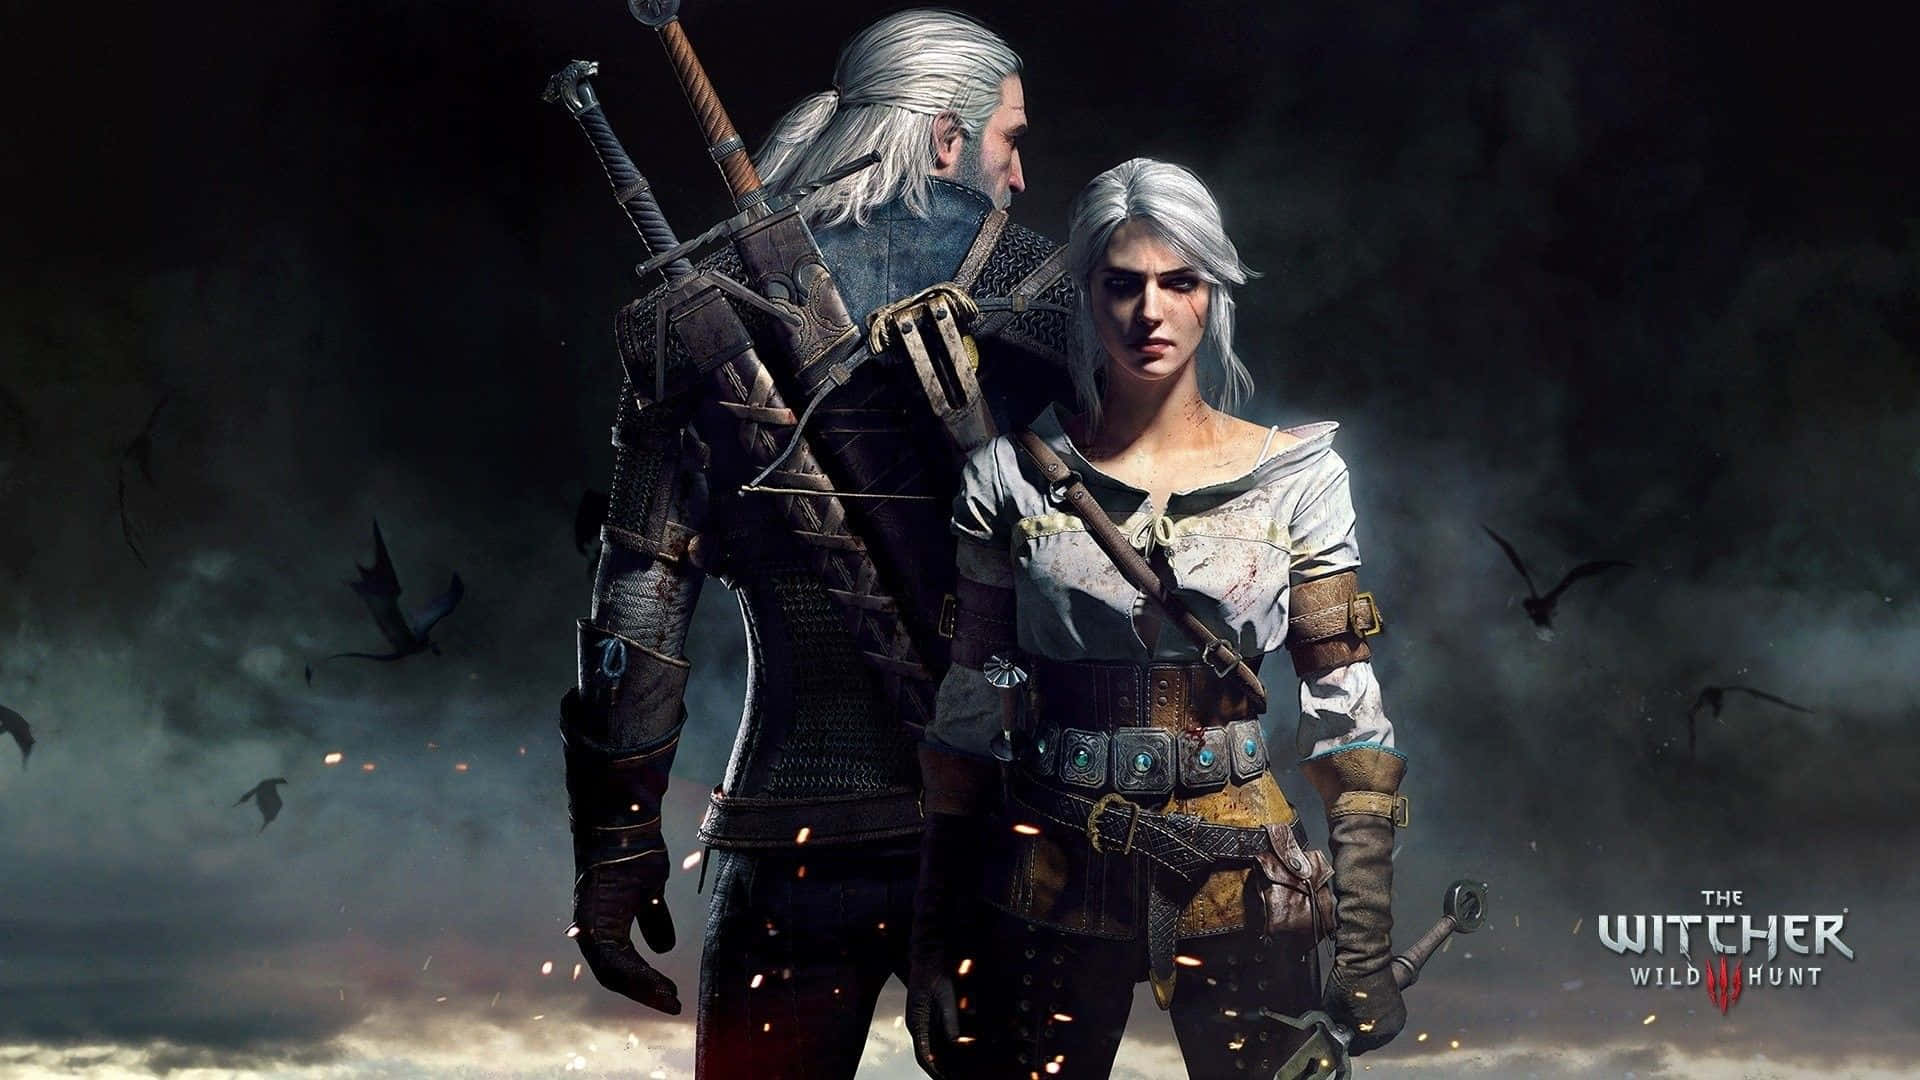 An Action-Packed Scene from The Witcher Wallpaper